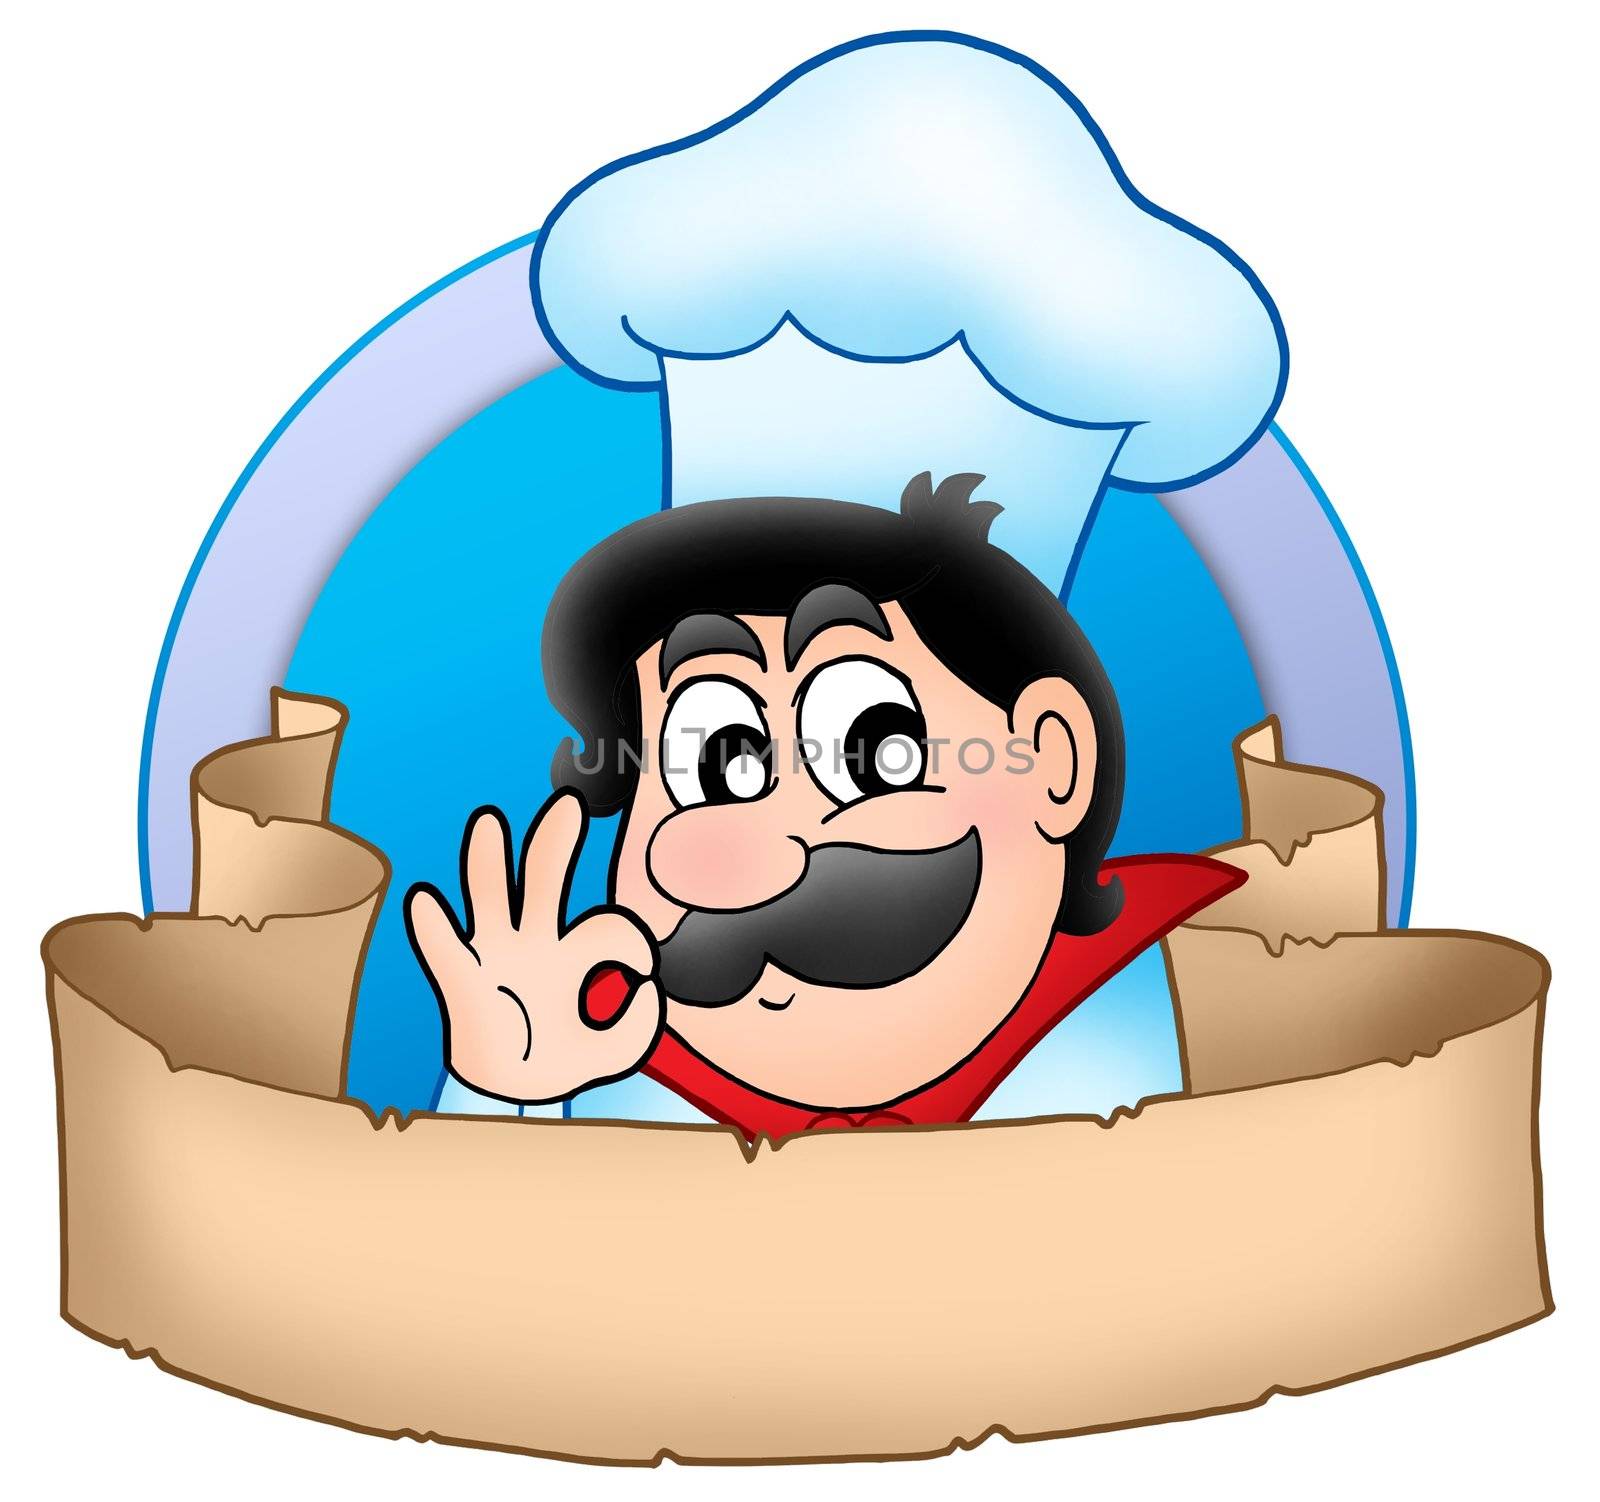 Cartoon chef in circle with banner - color illustration.